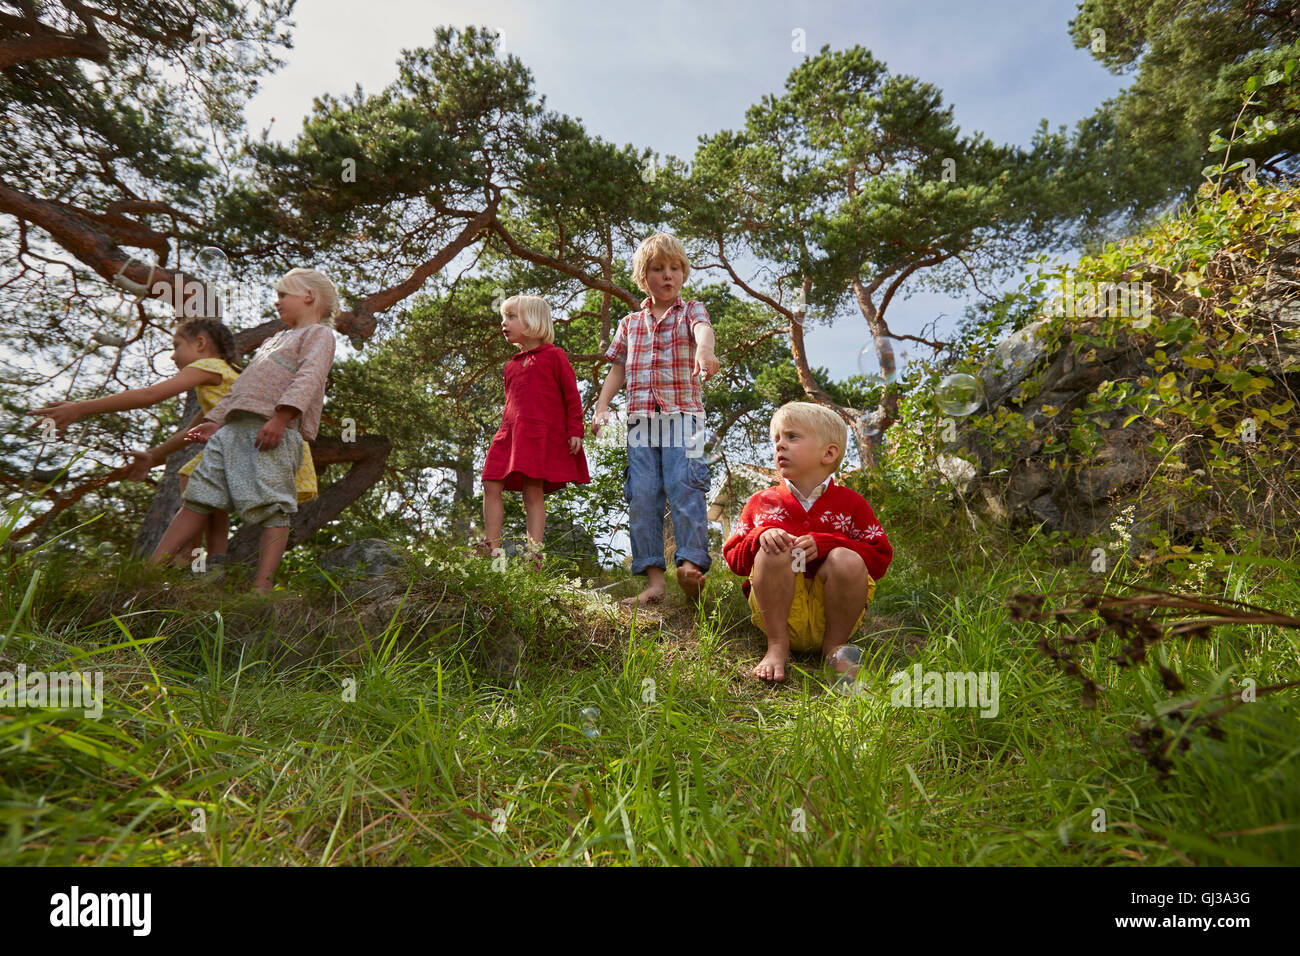 Small group of young friends playing outdoors Stock Photo